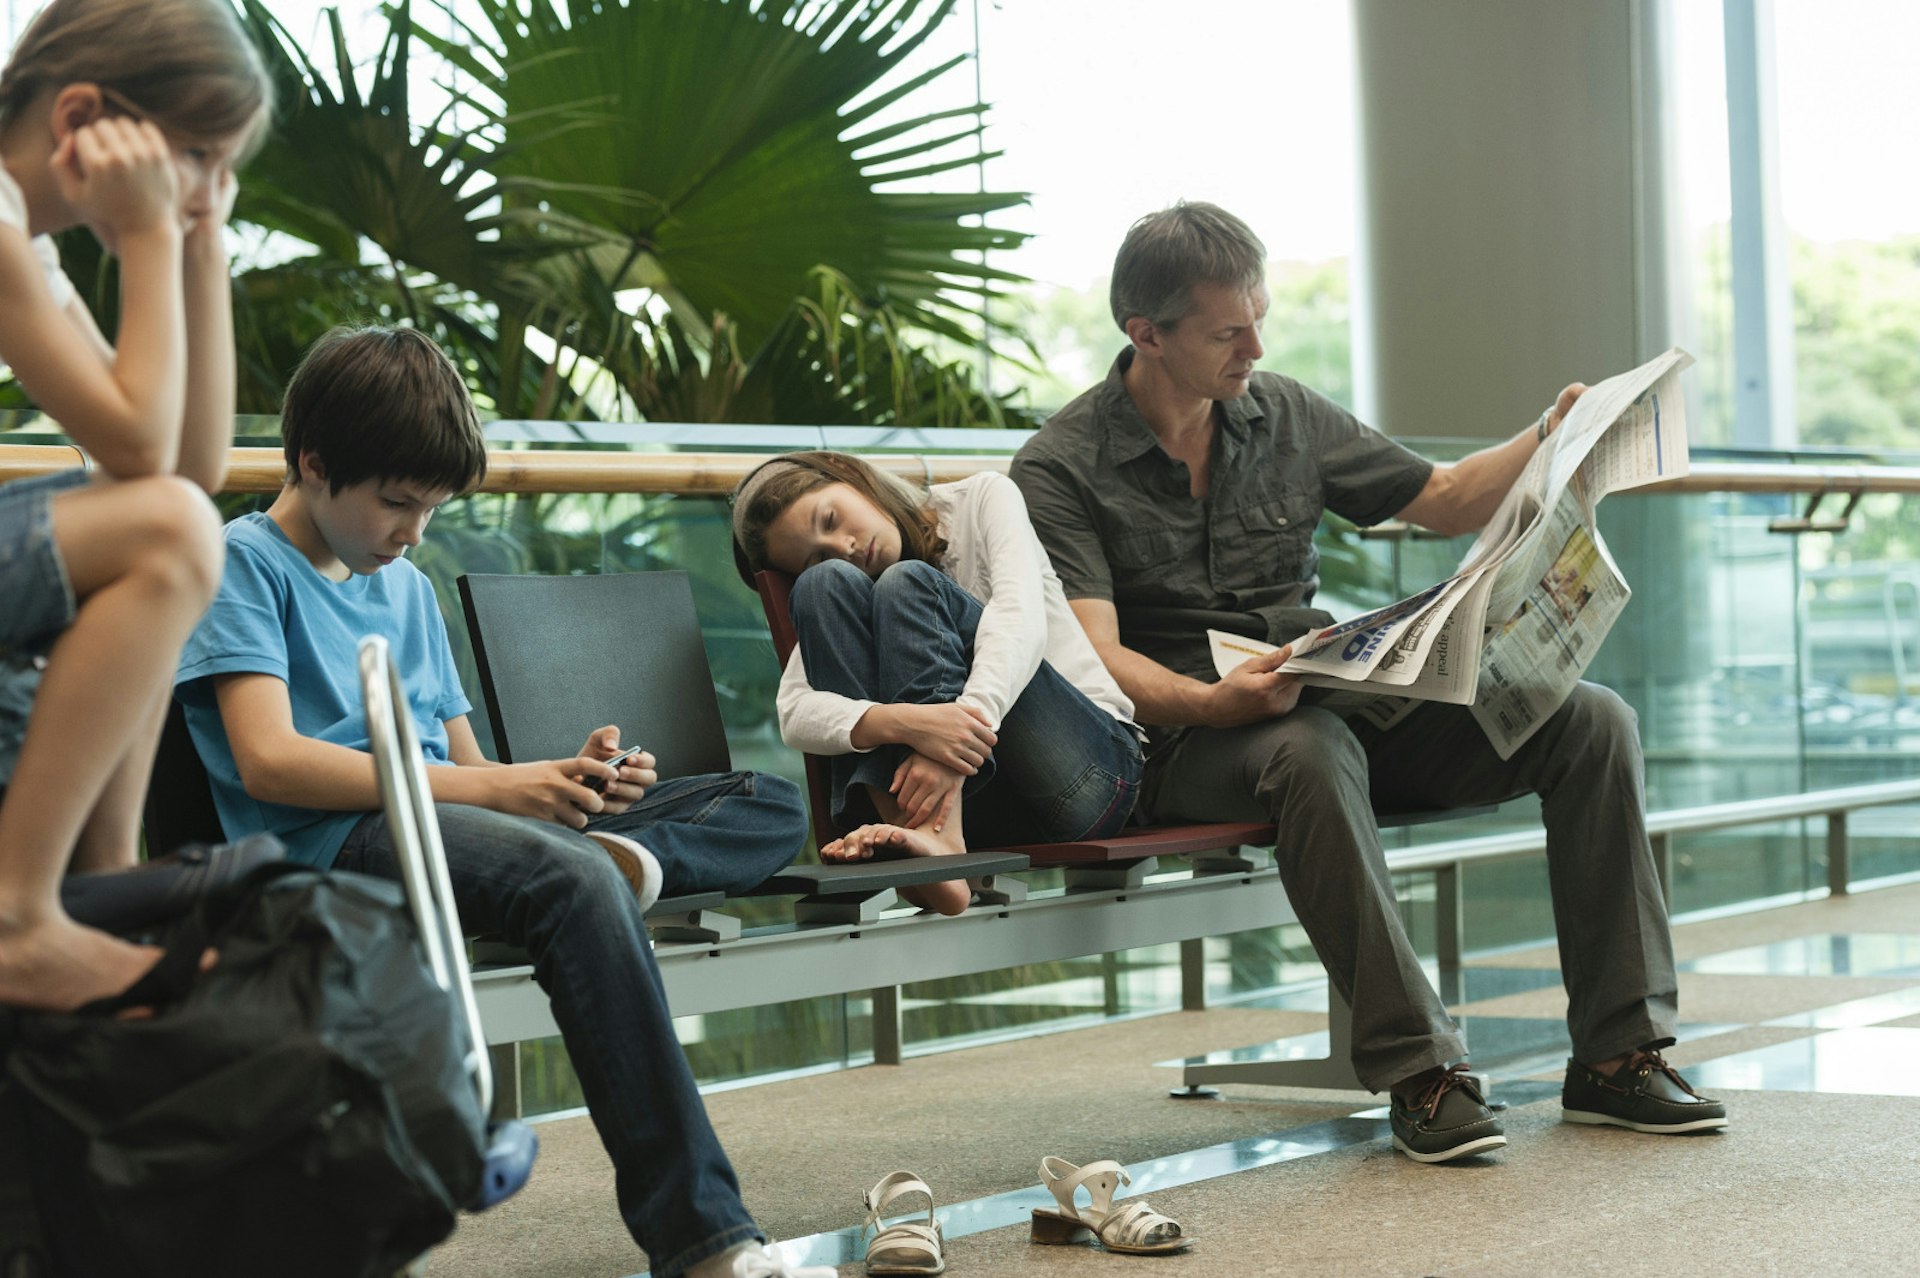 A family waits at the airport. A man reads the paper, one girl curls up on the seat, a boy plays with a phone while another girl sits on a suitcase with her head in her hands.